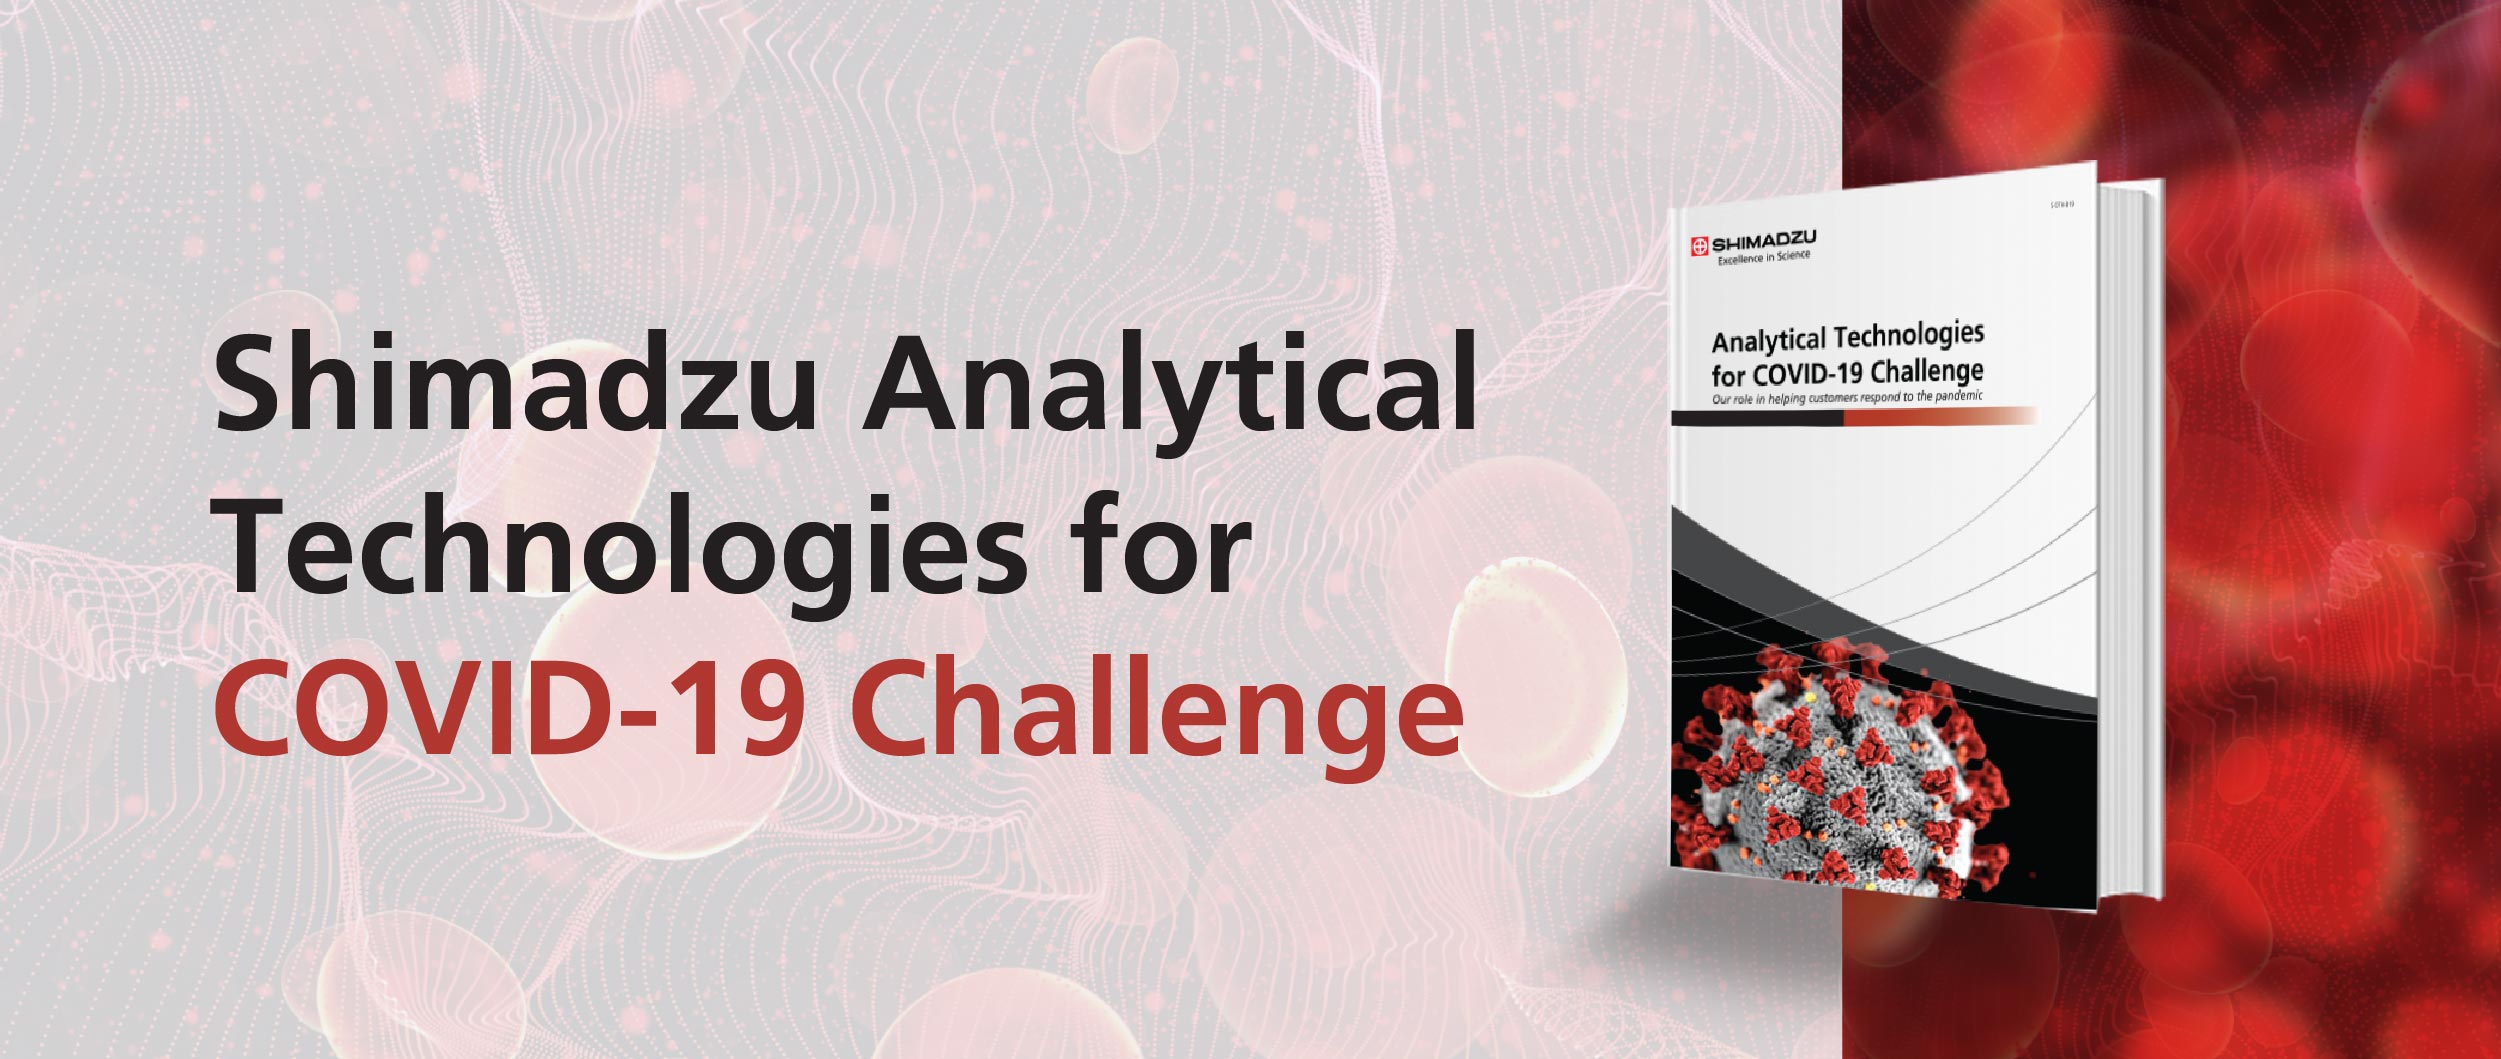 Shimadzu Analytical Technologies for COVID-19 Challenge